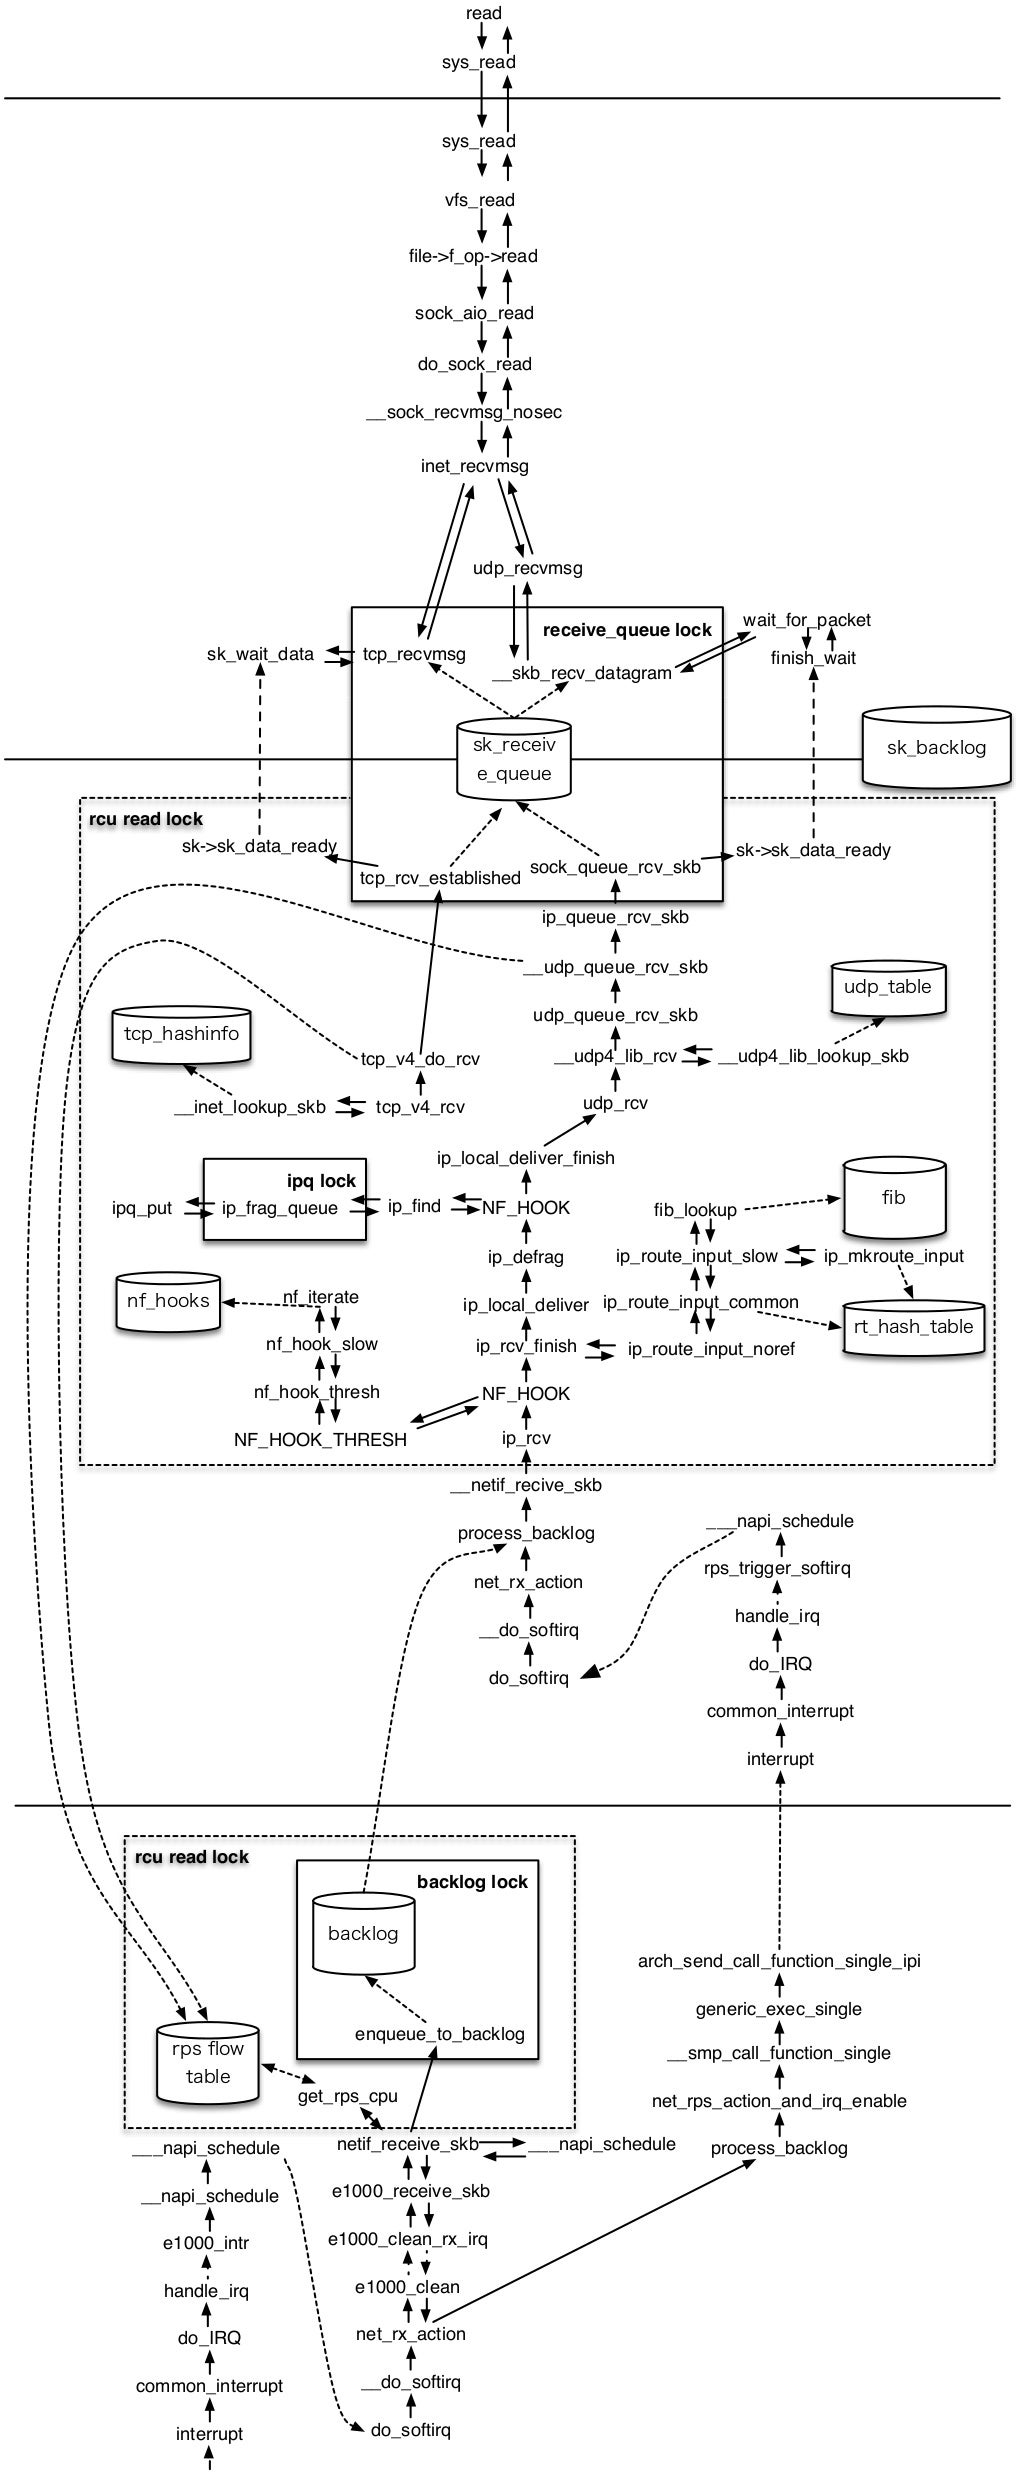 Data Flow of Networking in Linux Kernel